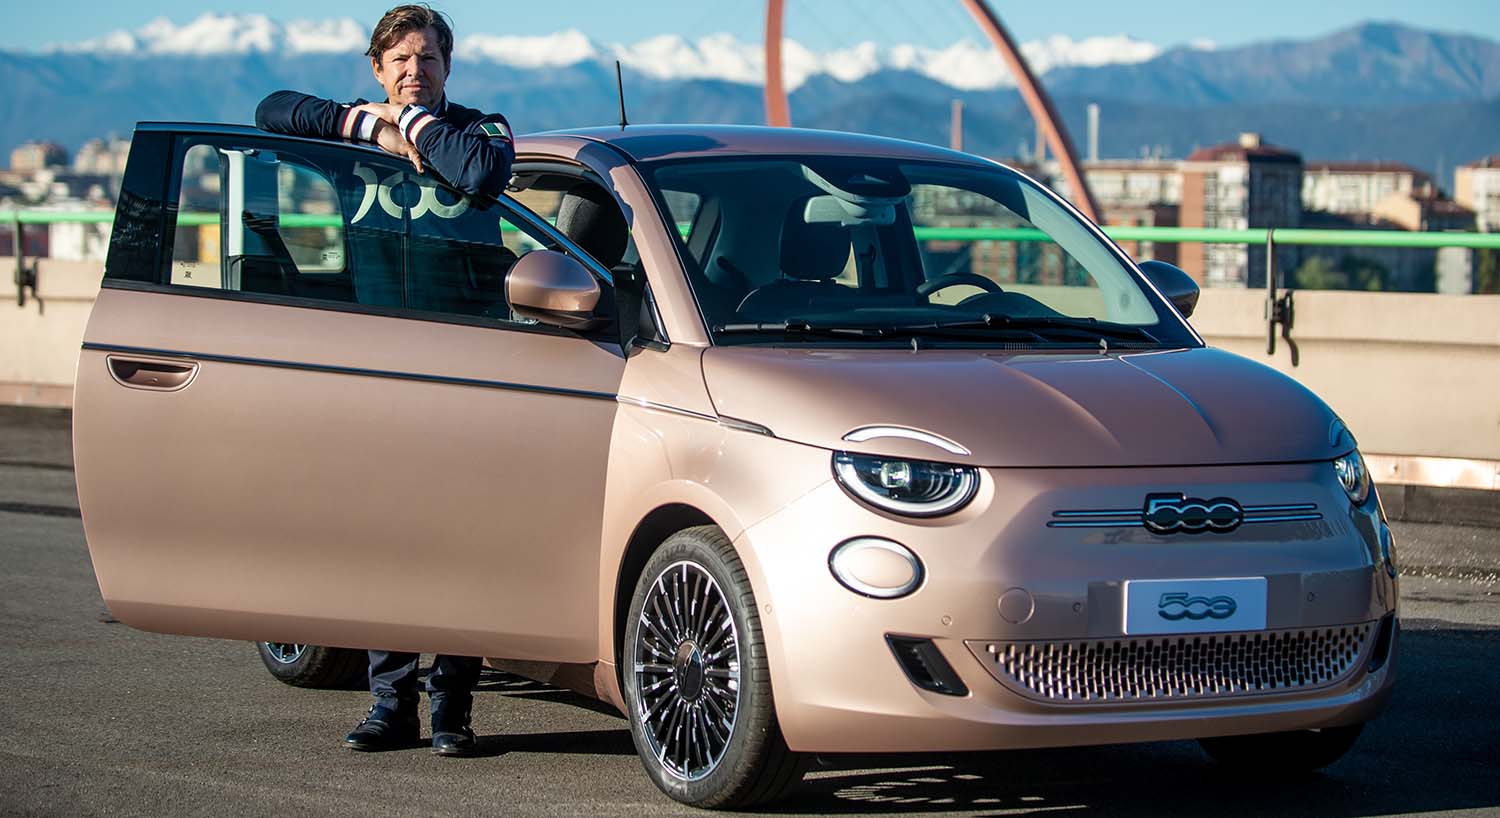 The All-New Fiat 500 – It’s Time To Make A better future